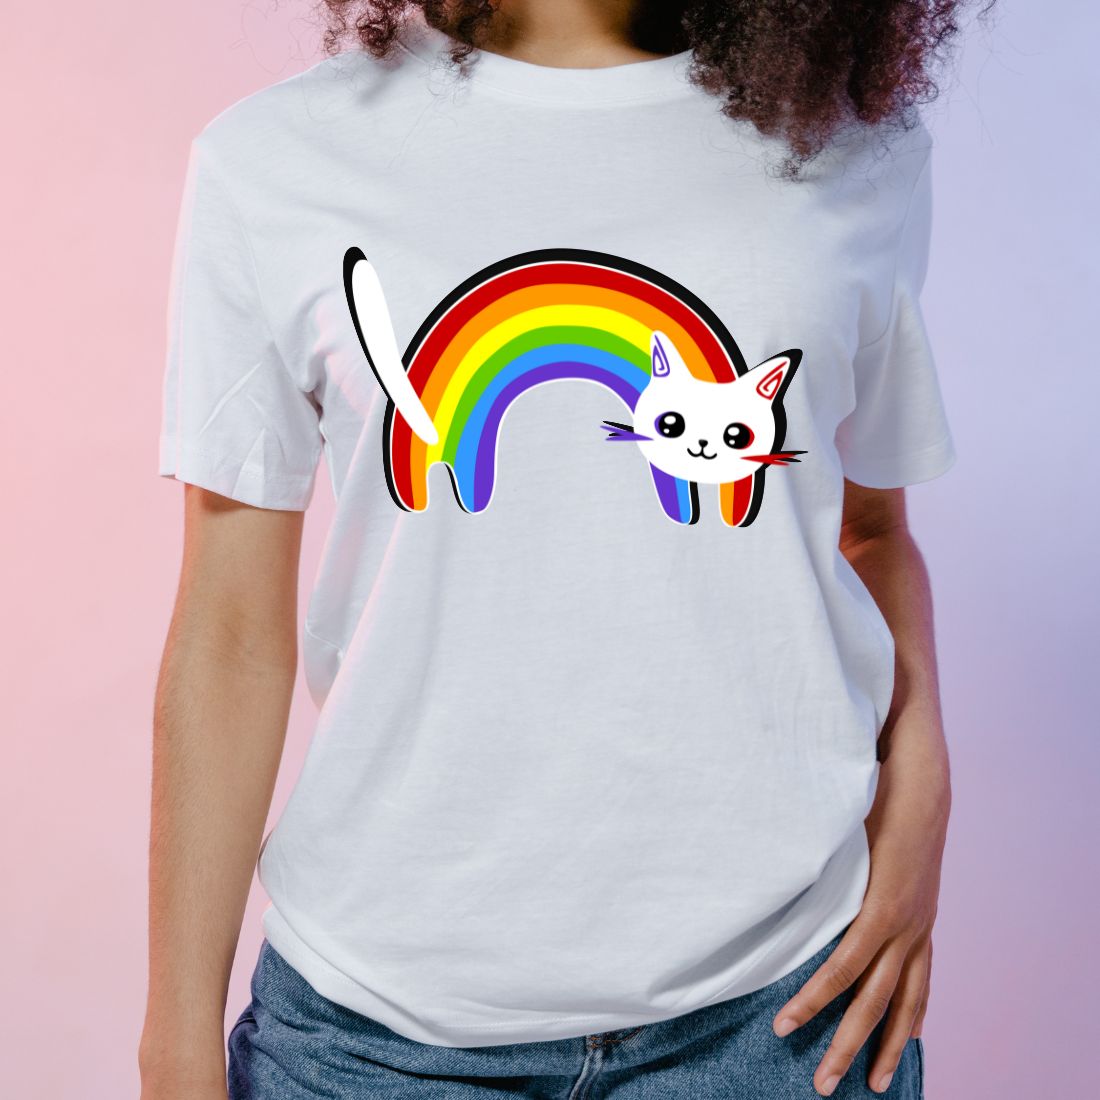 Rainbow cat preview image.